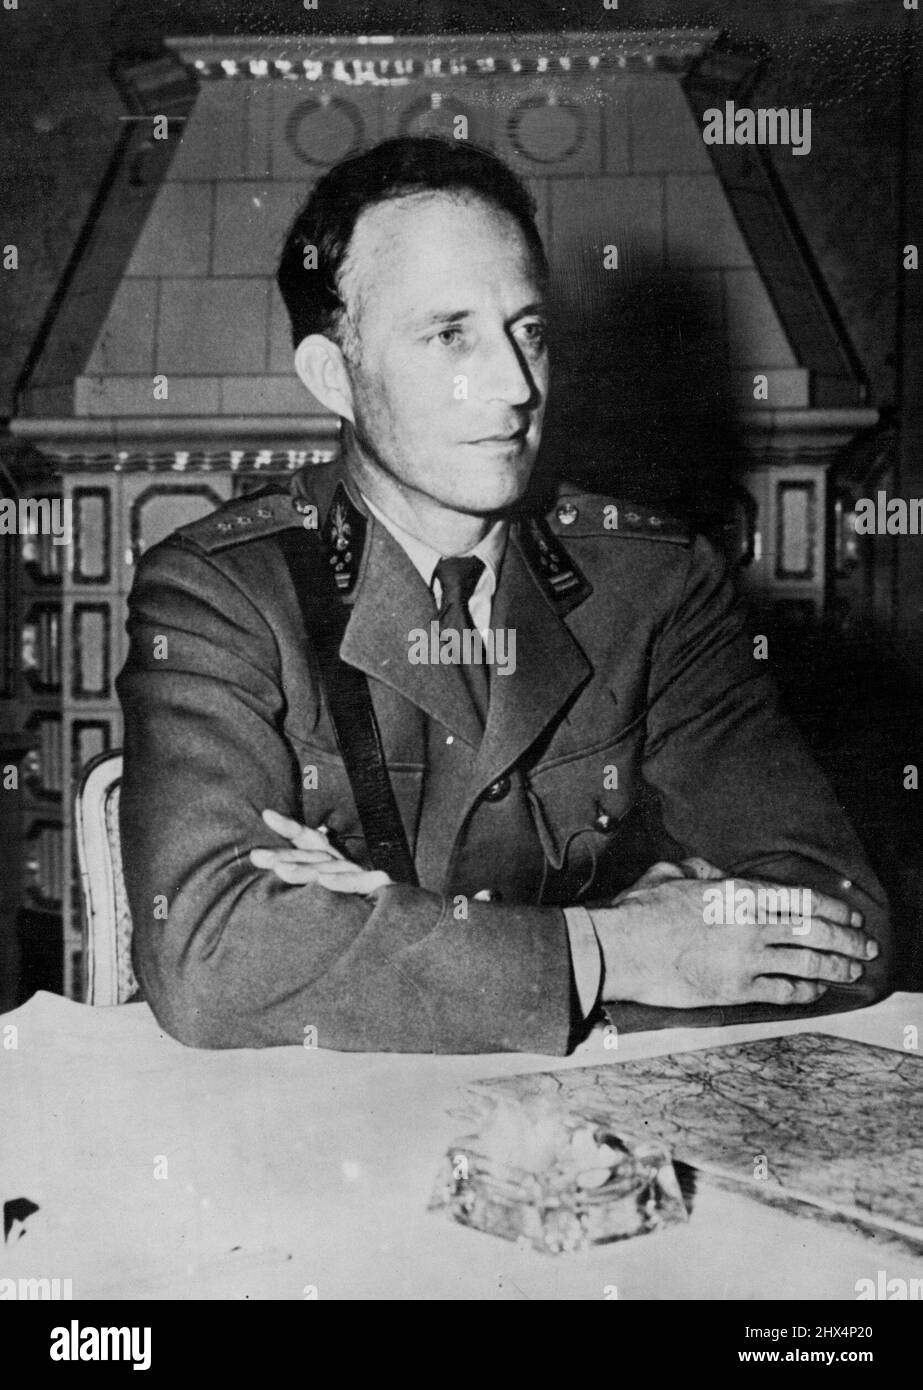 King Leopold Ill of Belgium, after his liberation from S.S. Troopers by Recon - elements of 7th., Army following a stiff fight although hostilities were to have ceased prior to the liberation. He was removed from Belgium on January 7th, 1944. Leopold - making trouble over abdication. August 1, 1945. (Photo by U.S. Official Photograph). Stock Photo